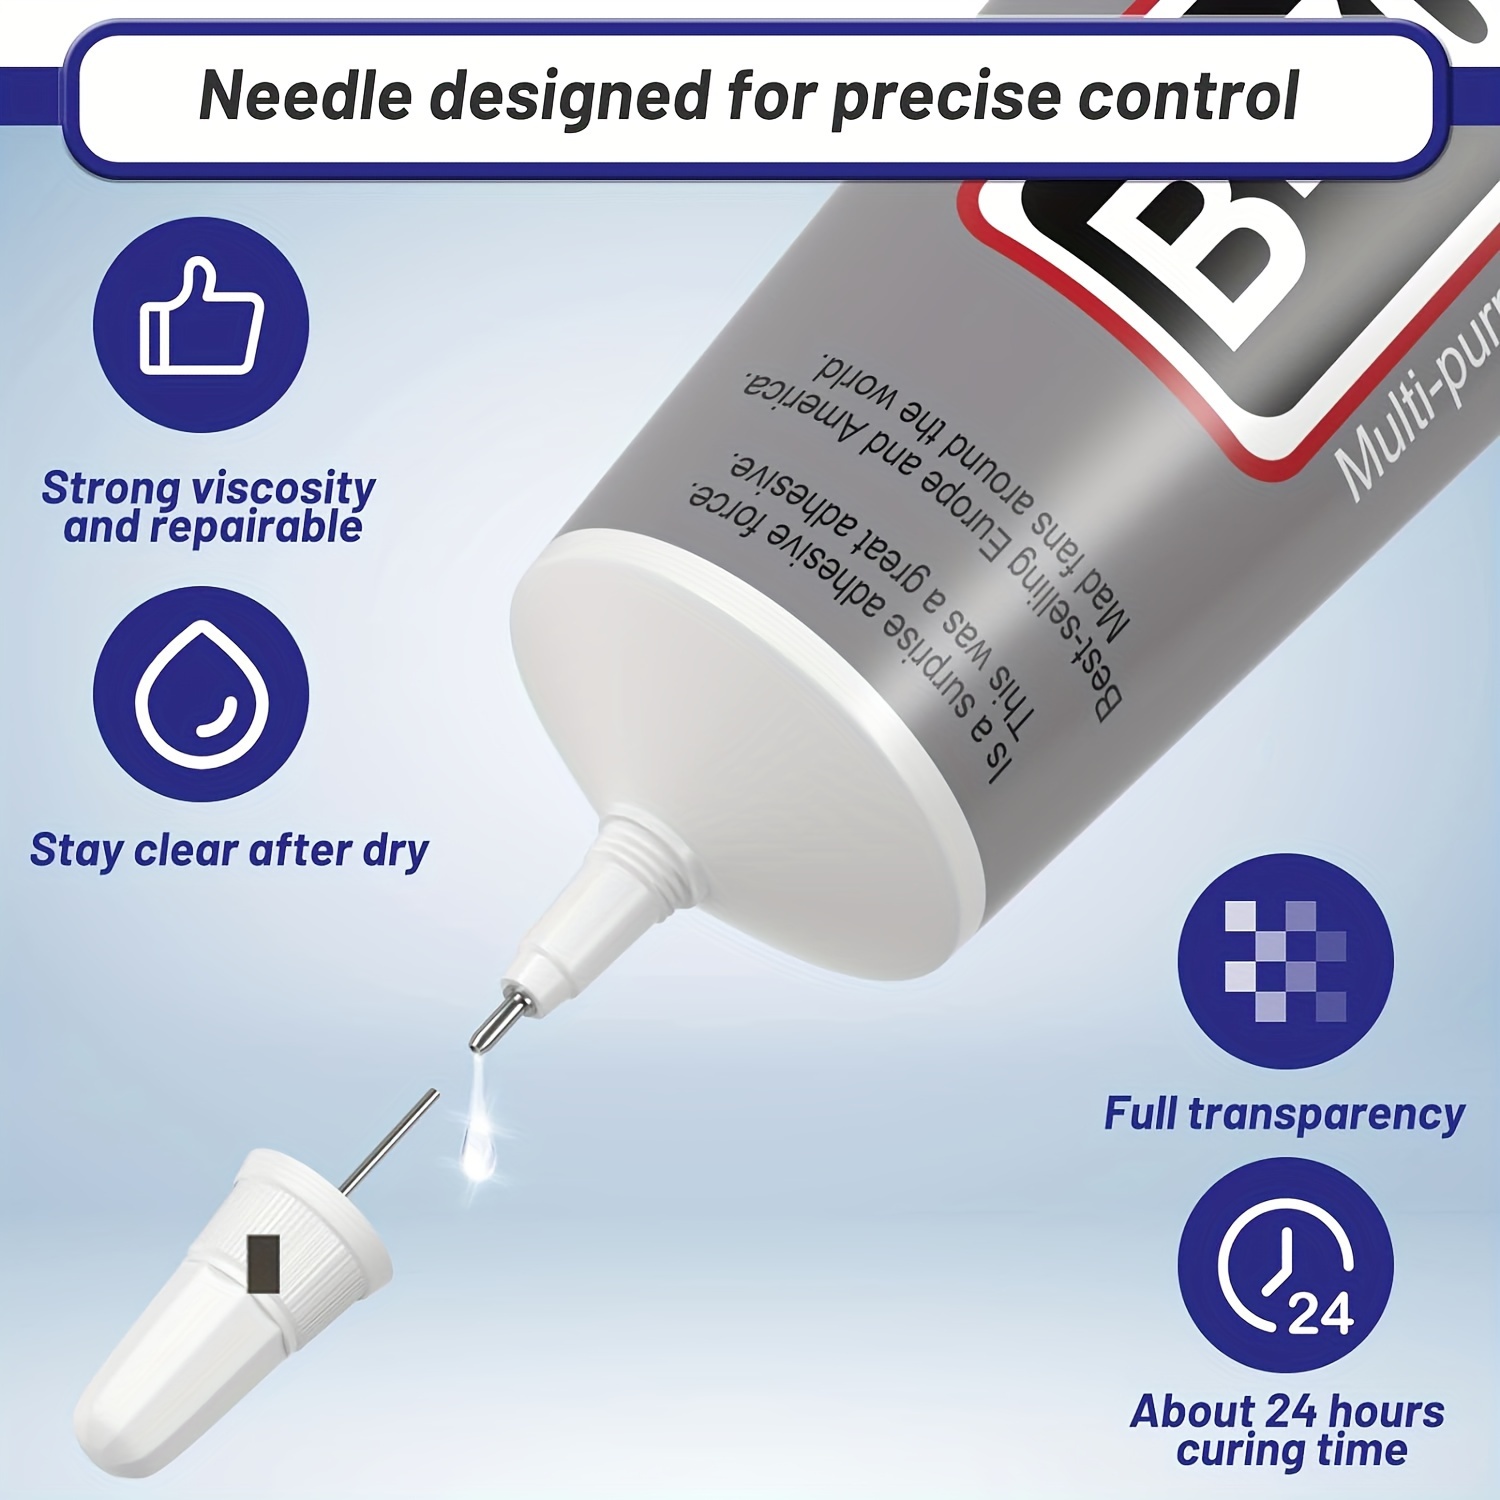 B 7000 Fabric Glue with Precision Tips, Upgrade Industrial Strength Adhesive  B-7000 Glue Clear for Jewelry Crafts DIY, Metal, Stone, Rhinestone Gems  Gel, Glass, Fabric, Cell Phone Repair 